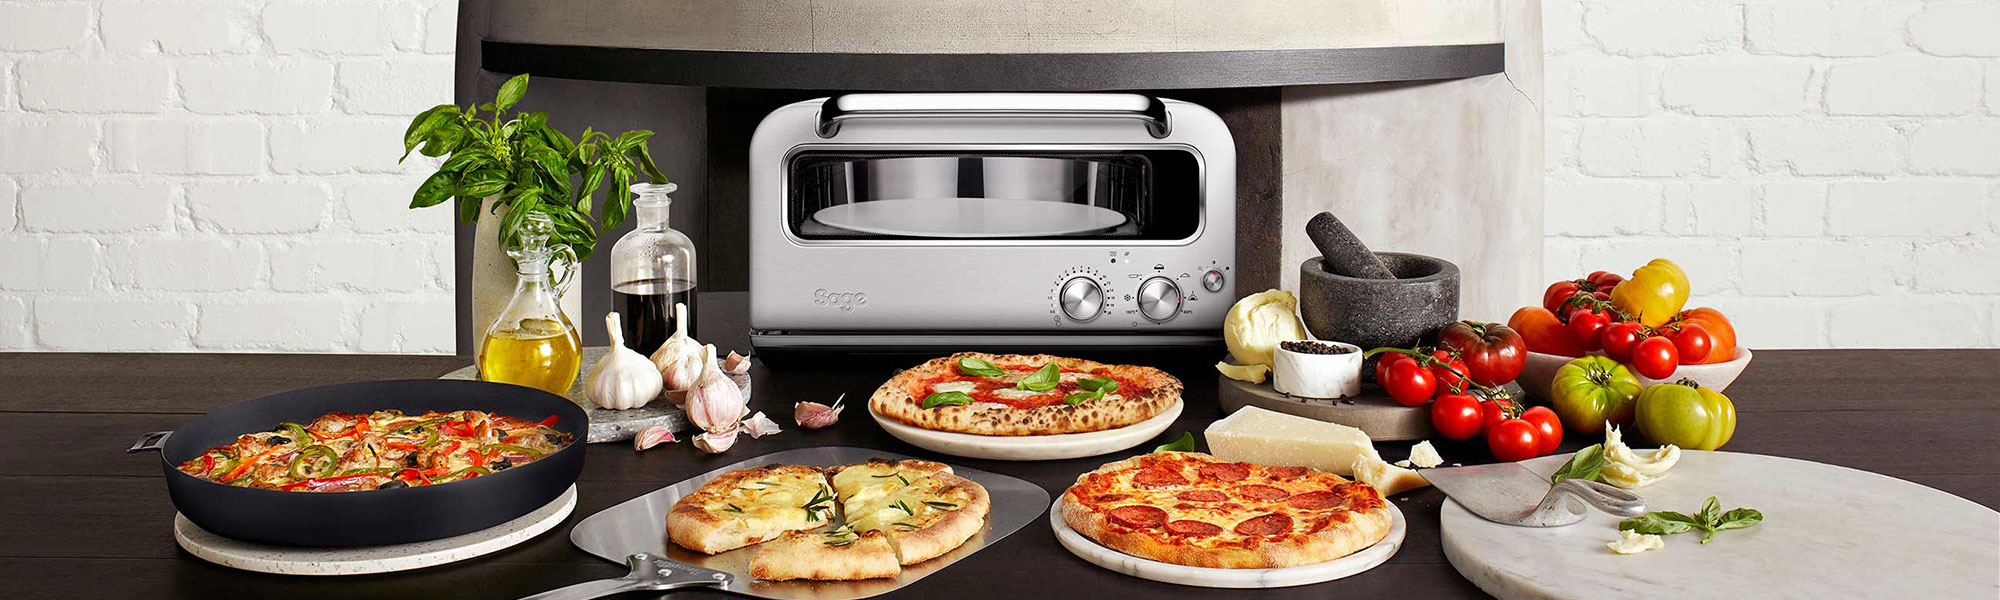 the Smart Oven Pizzaiolo Pizza maker in Brushed Stainless Steel